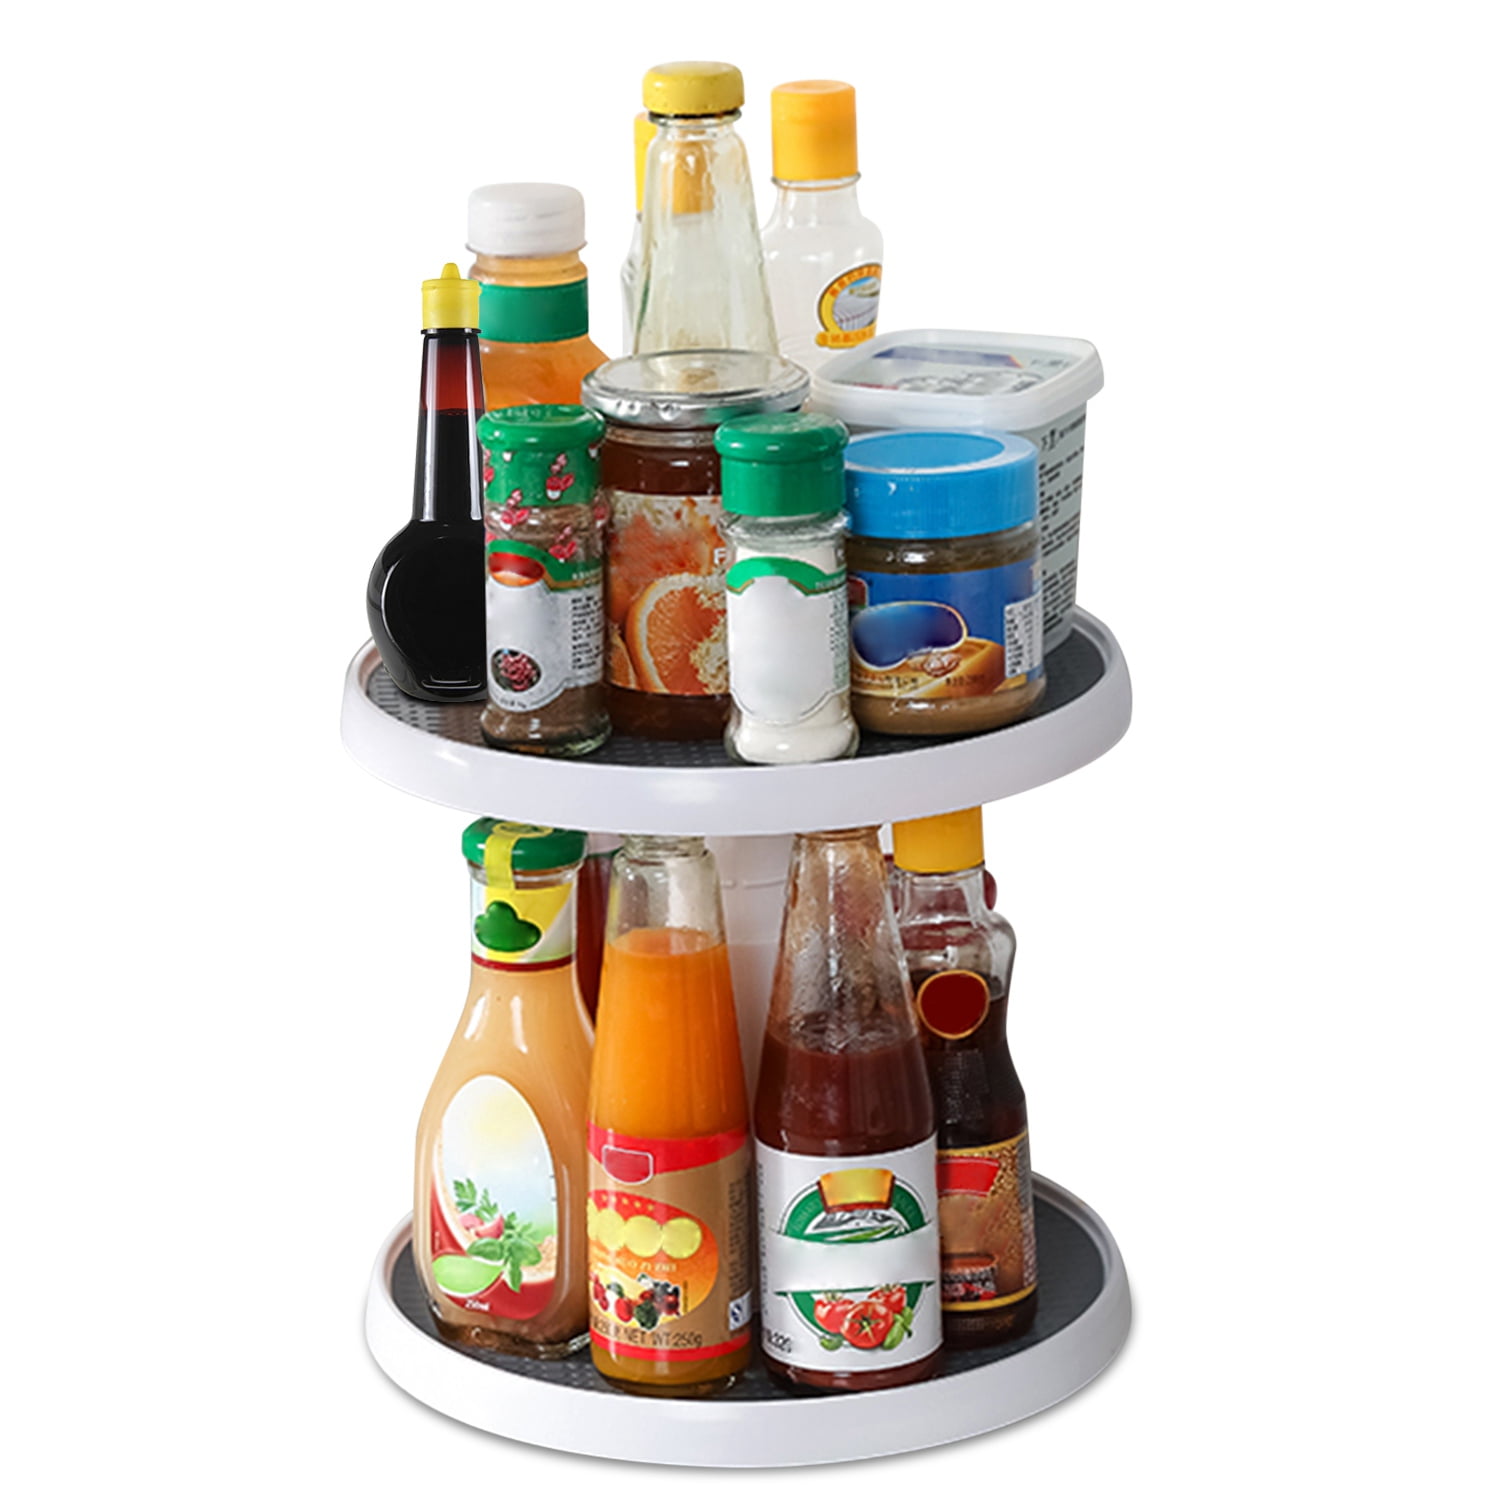 Dropship 2 Tier Lazy Susan 360° Turntable Non Skid Kitchen Spice Rack  Organizer 10 Inch Height Adjustable Storage Rack For Cabinet Counter  Bathroom Pantry to Sell Online at a Lower Price